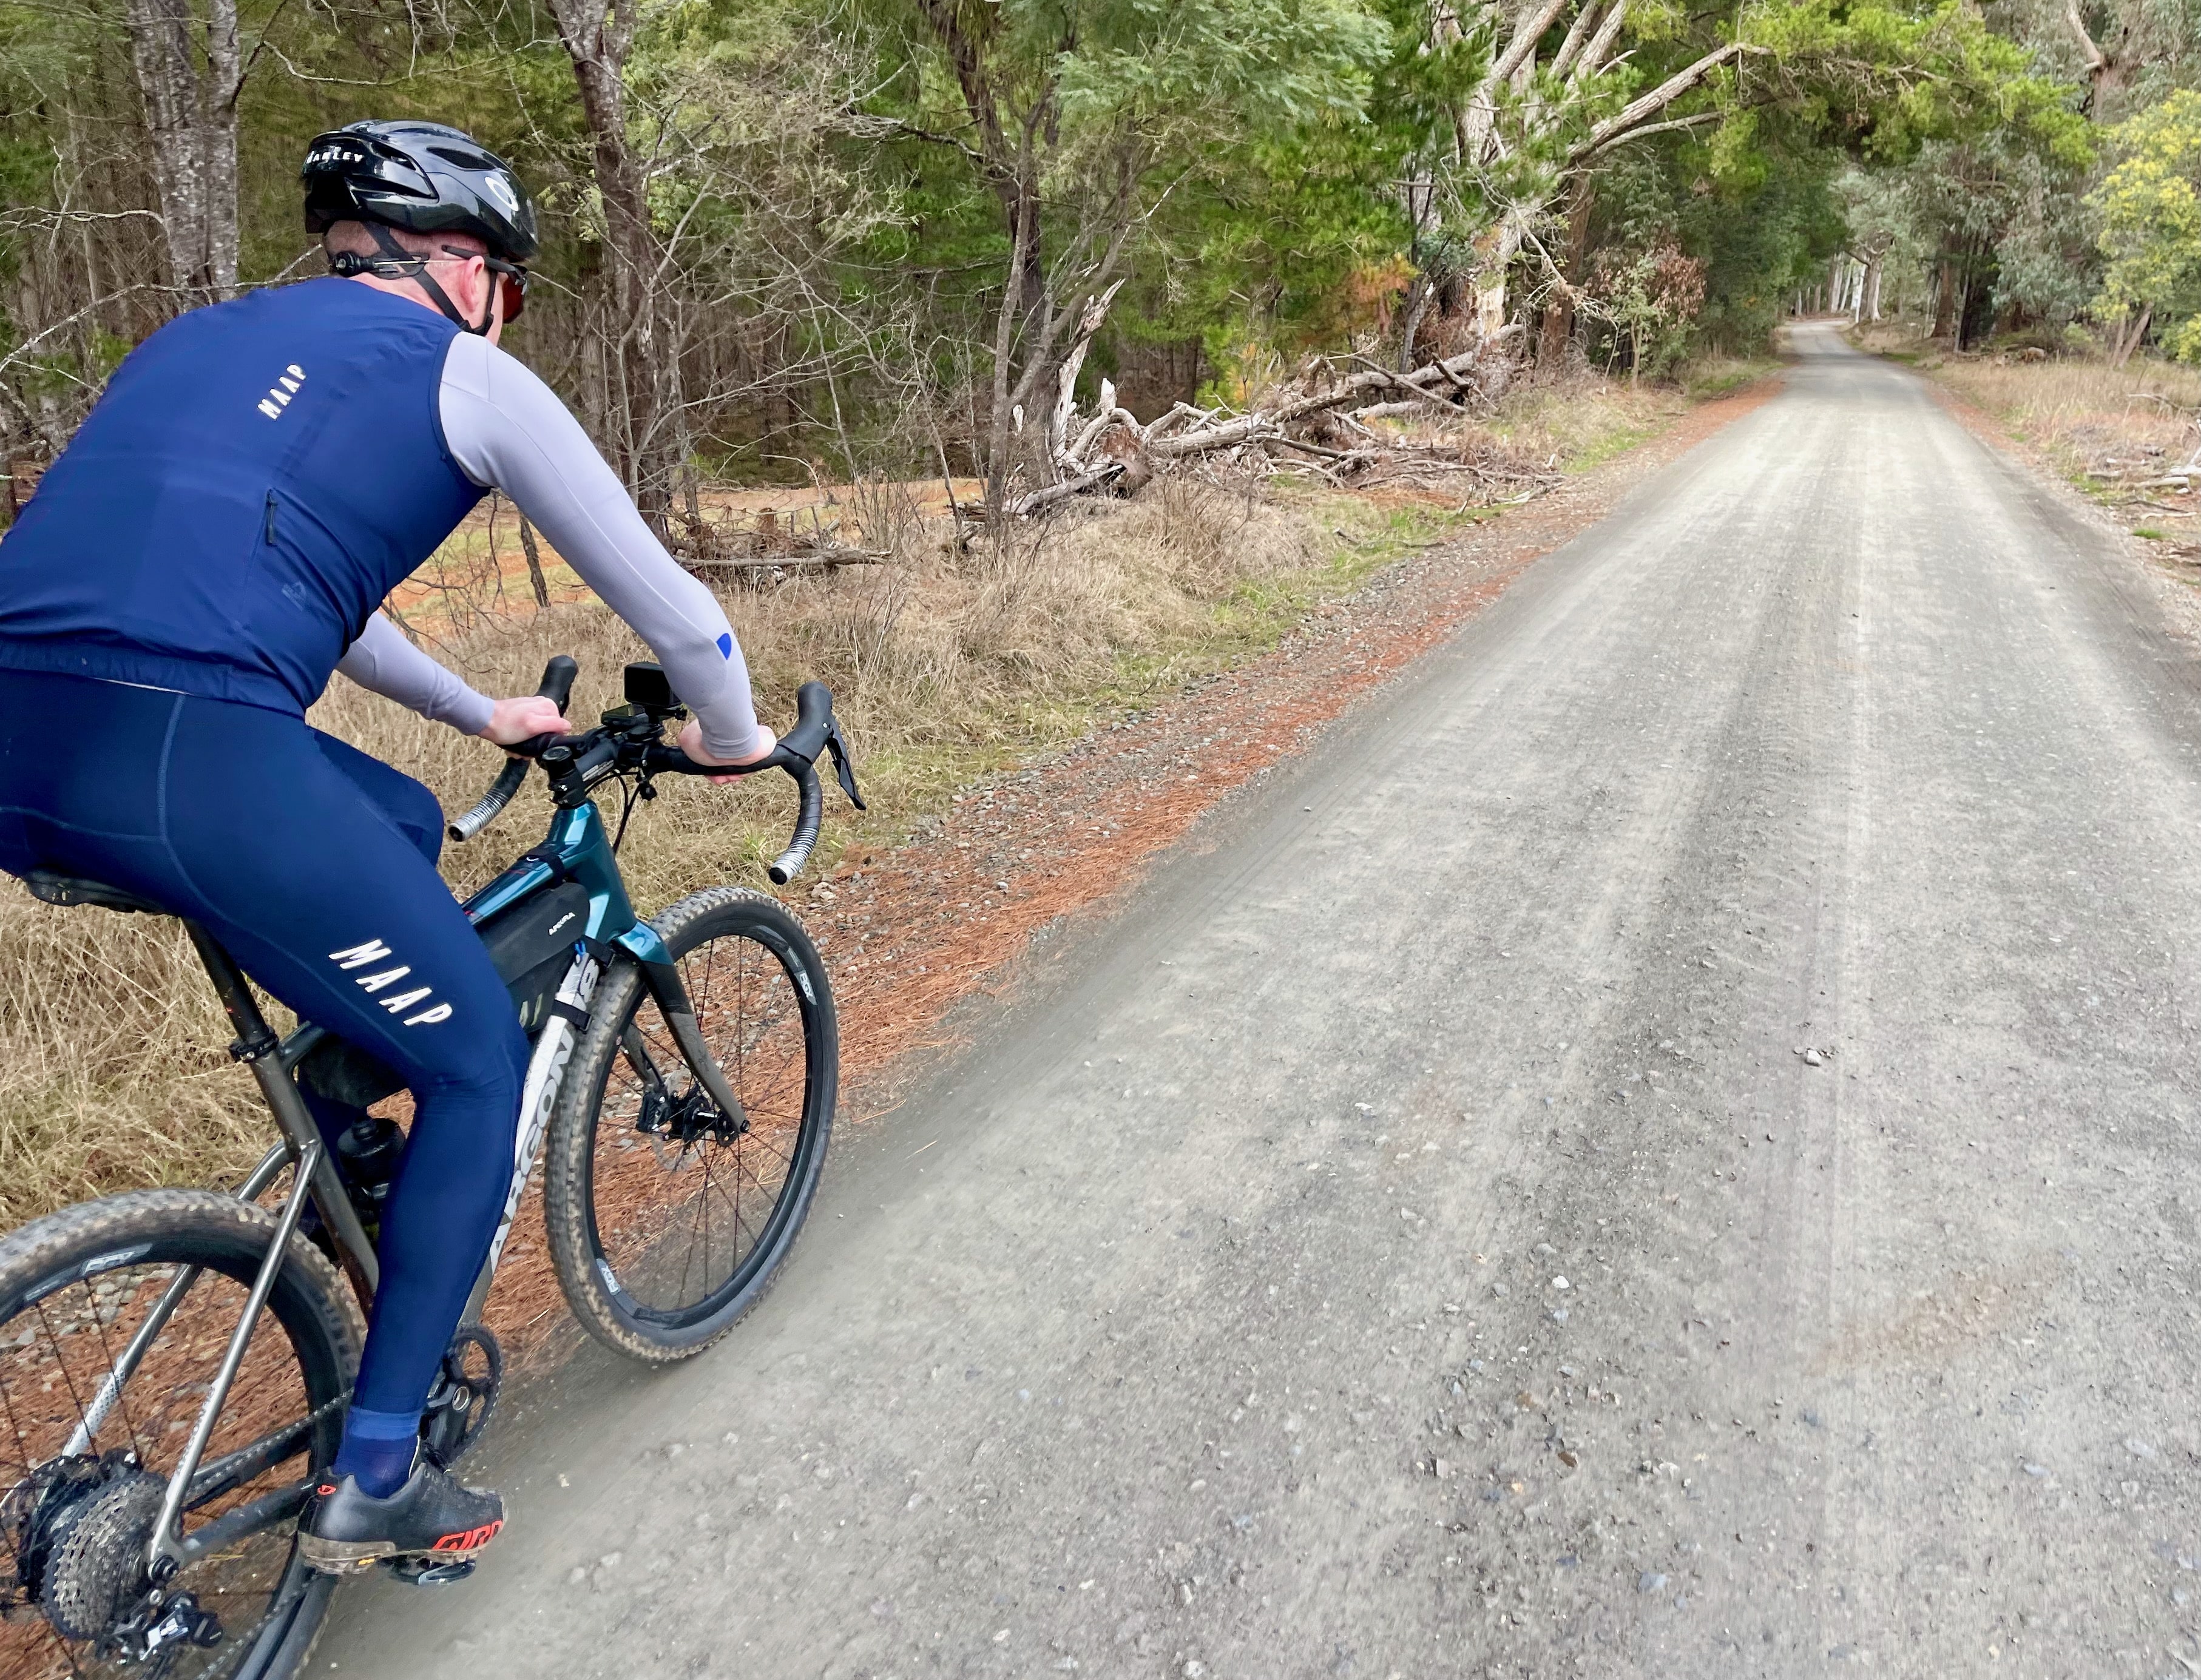 A cyclist riding on a smooth gravel road surrounded by native bushland